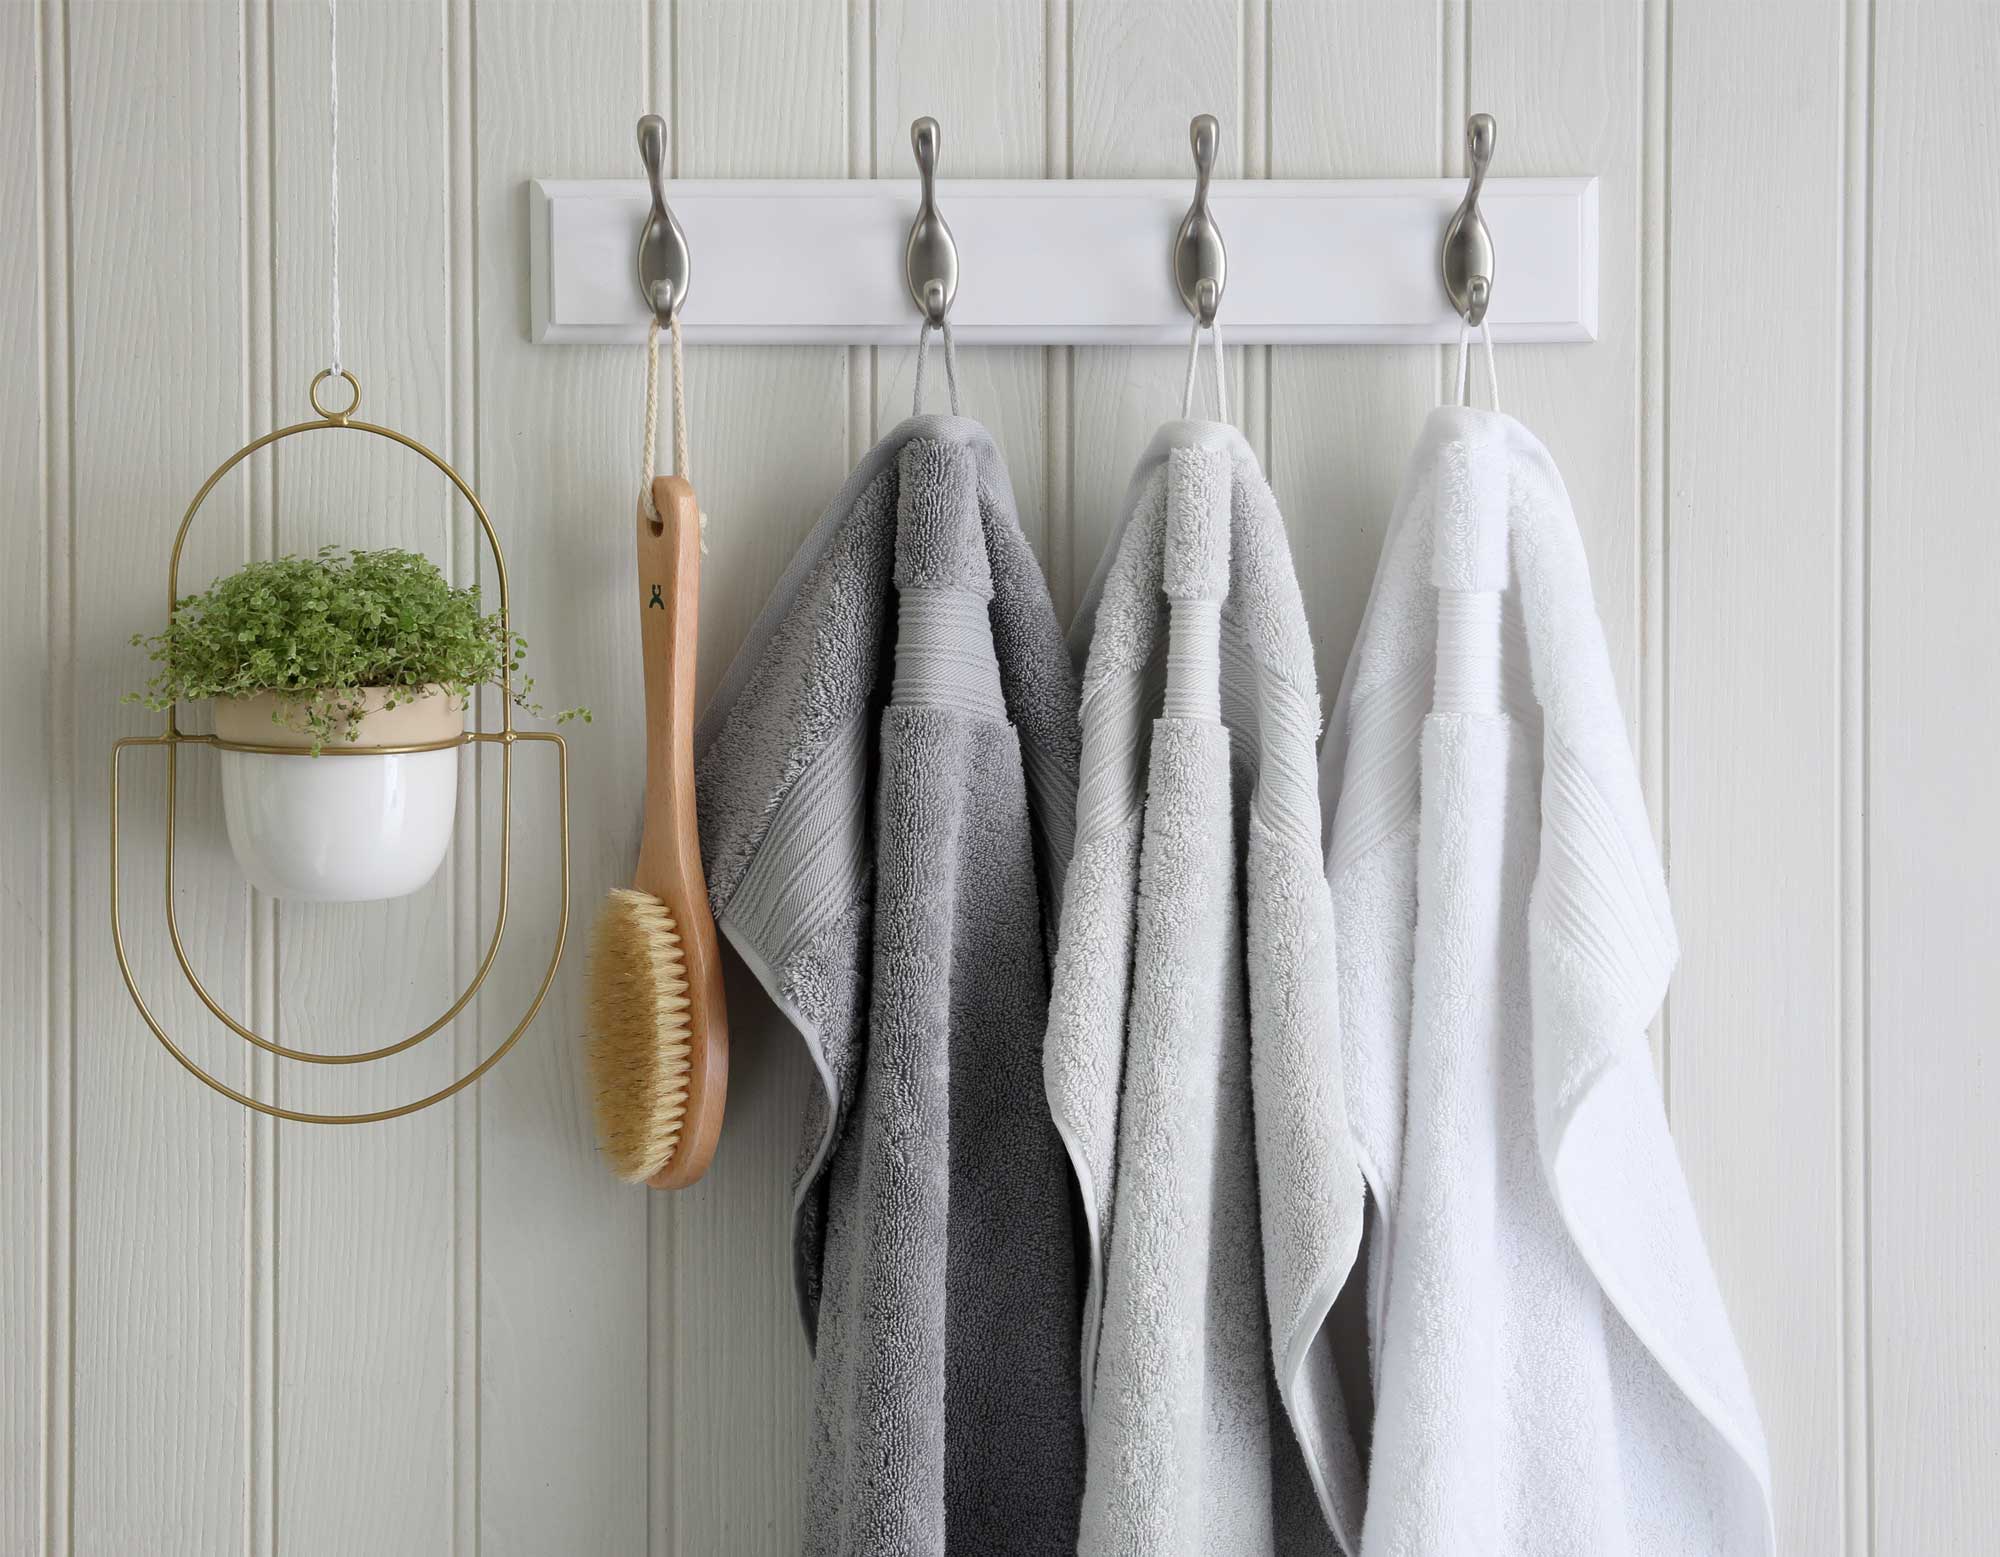 Egyptian cotton bath towels in white and grey hanging from hooks on wall